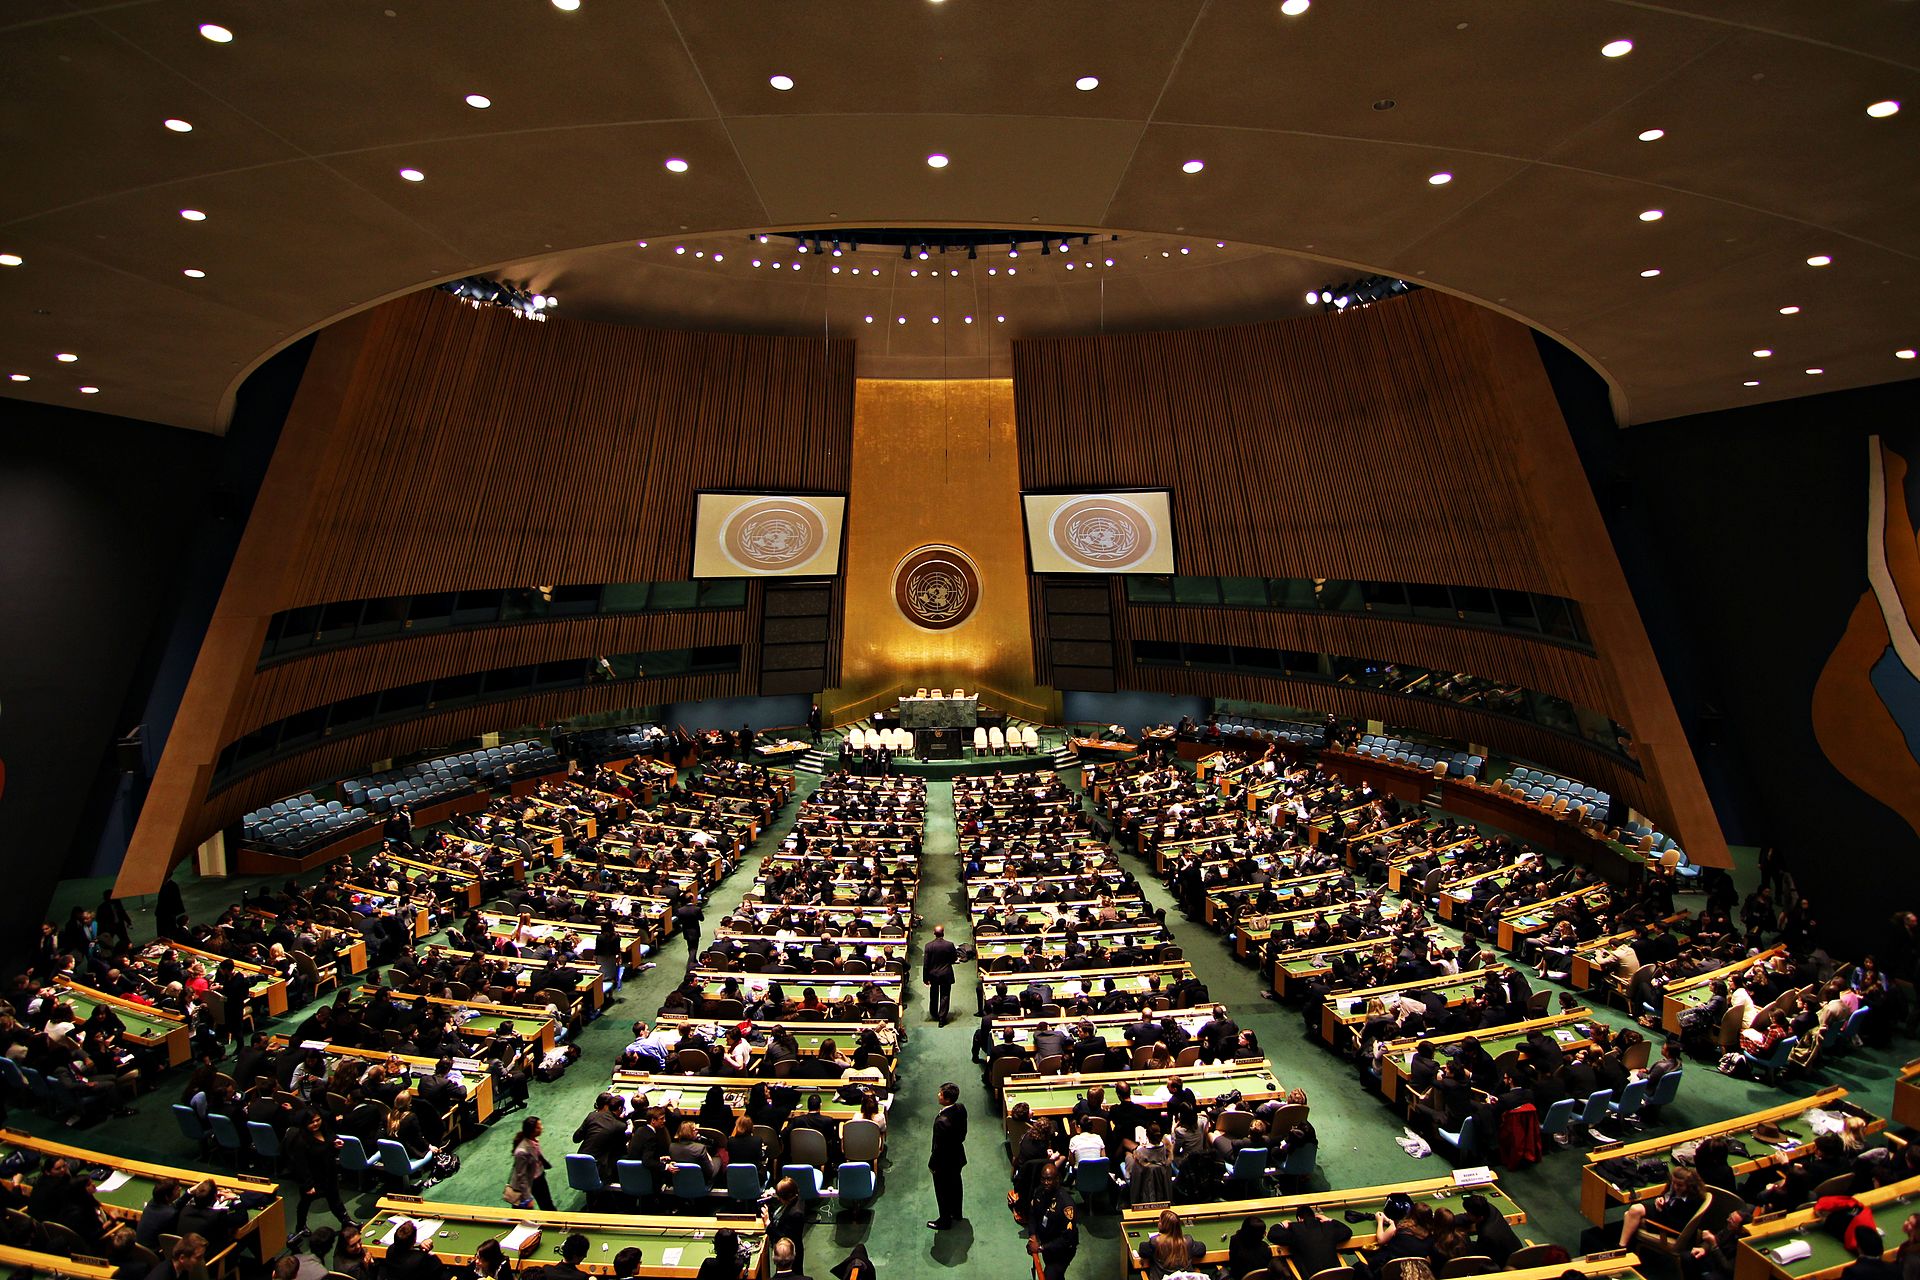 United Nations General Assembly Hall. Photo: Basil D. Soufi